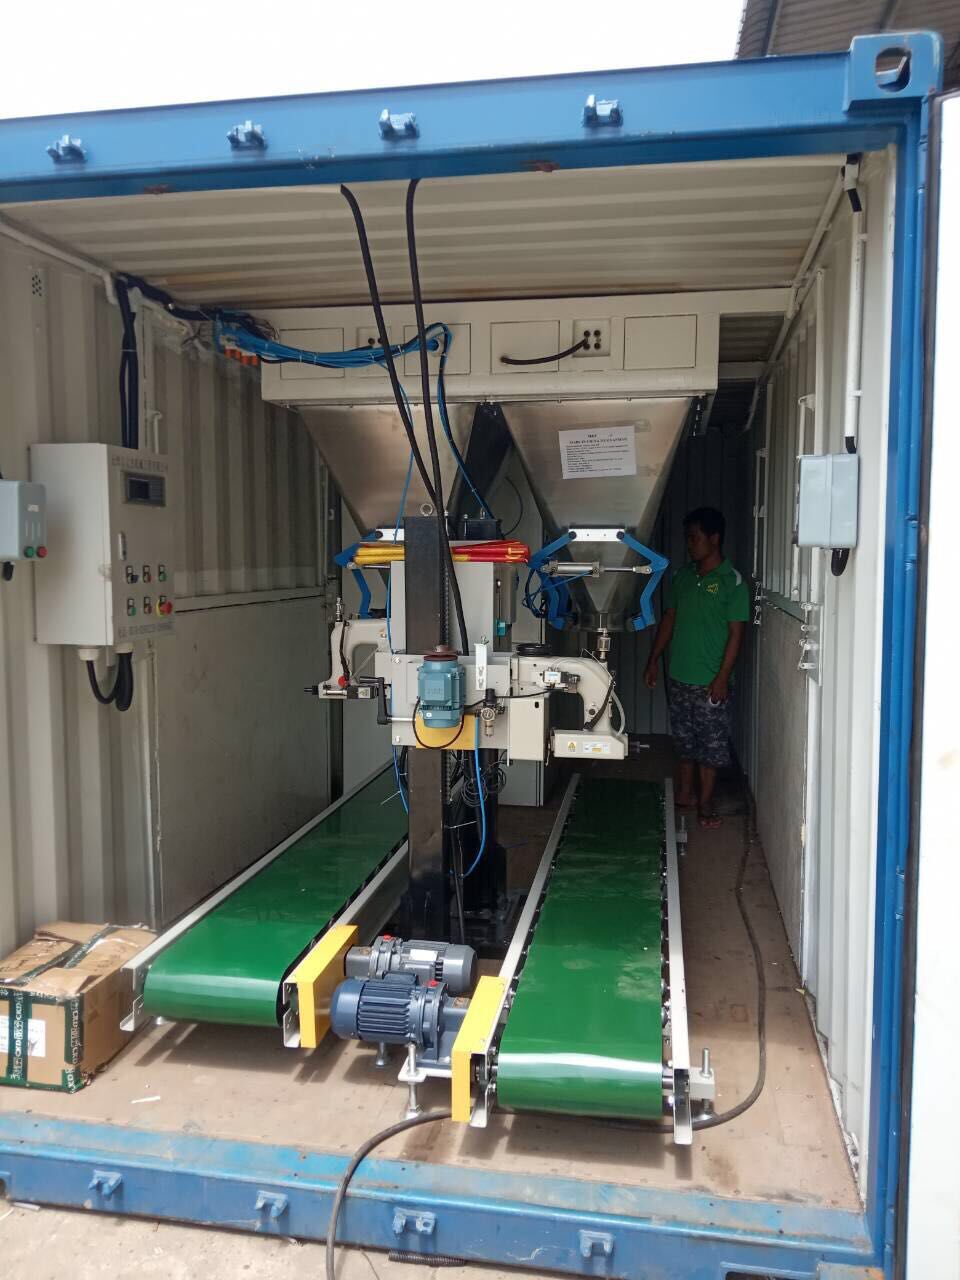 MOBILE CONTAINERIZED BAGGING MACHINE bagging machine fully Automatic Packing Palletizing Line, Fully Automatic Packing Line, Fully Automatic Bagging Line, Fully Automatic filling and packaging line, a